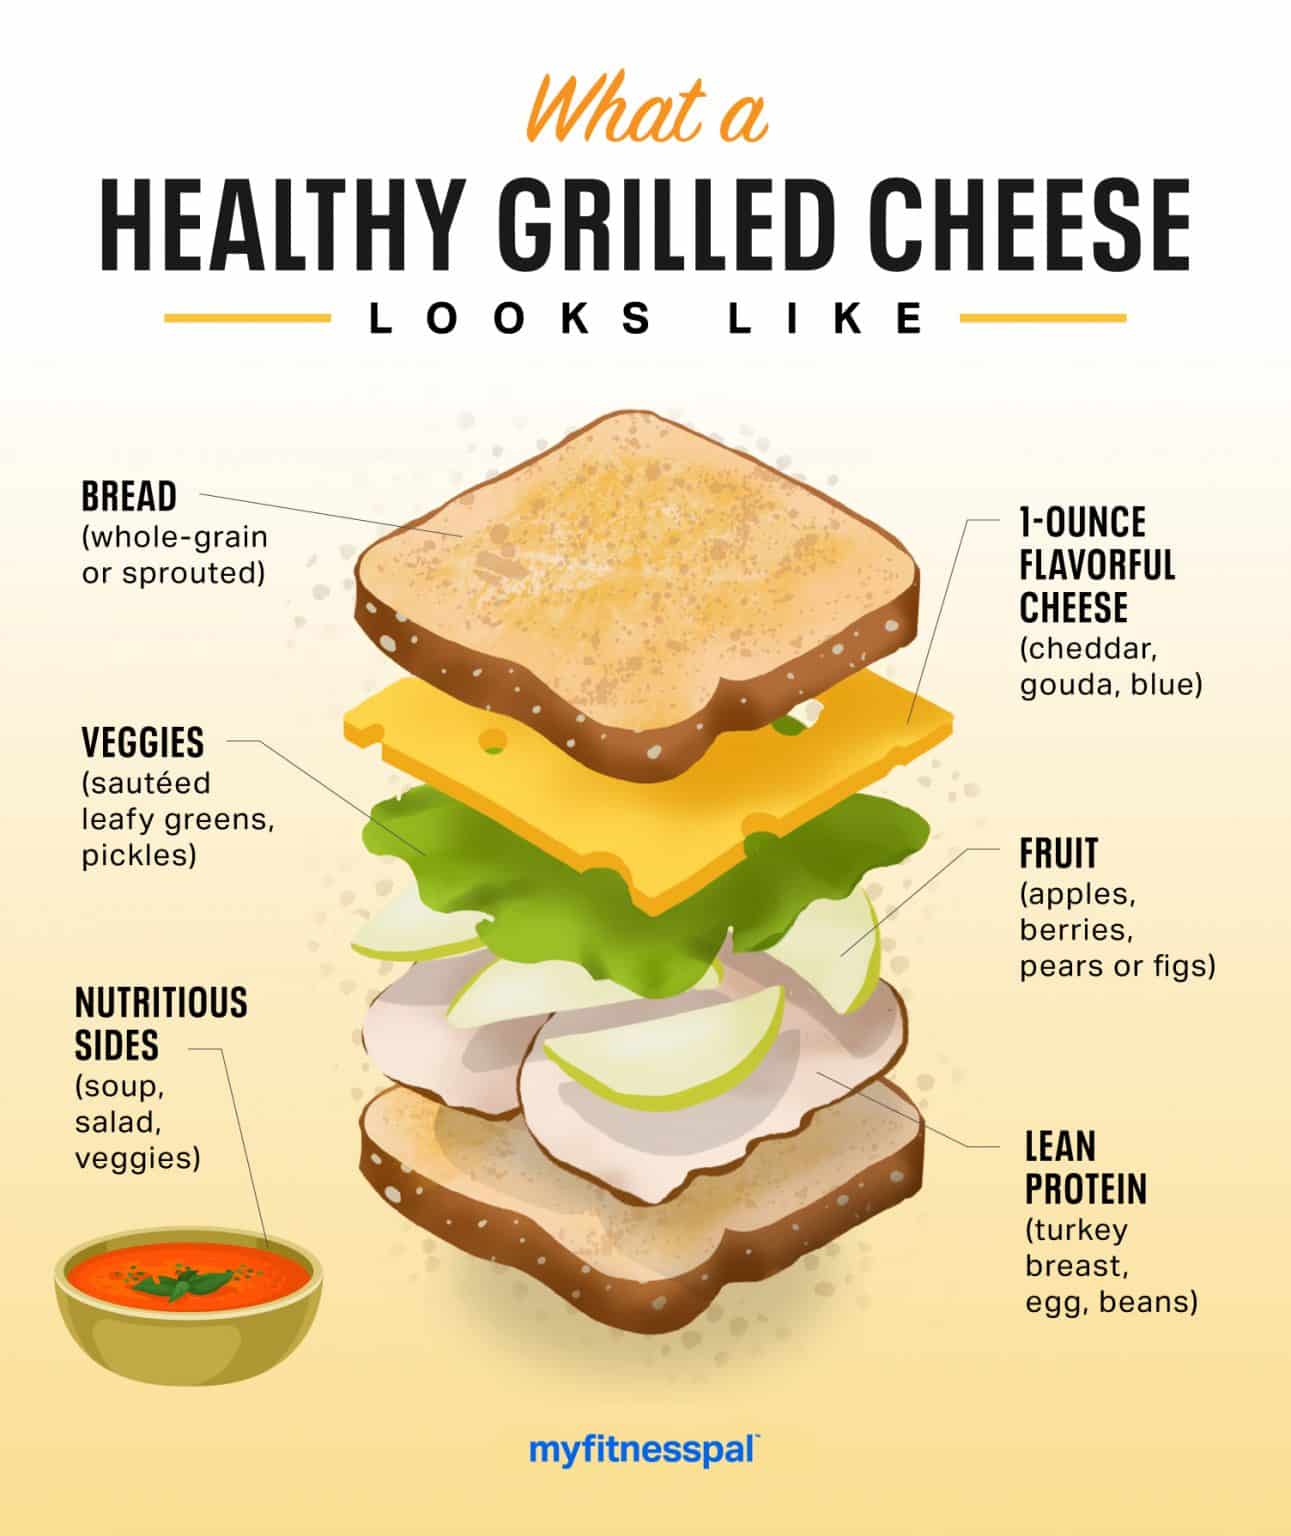 kwik trip grilled cheese nutrition